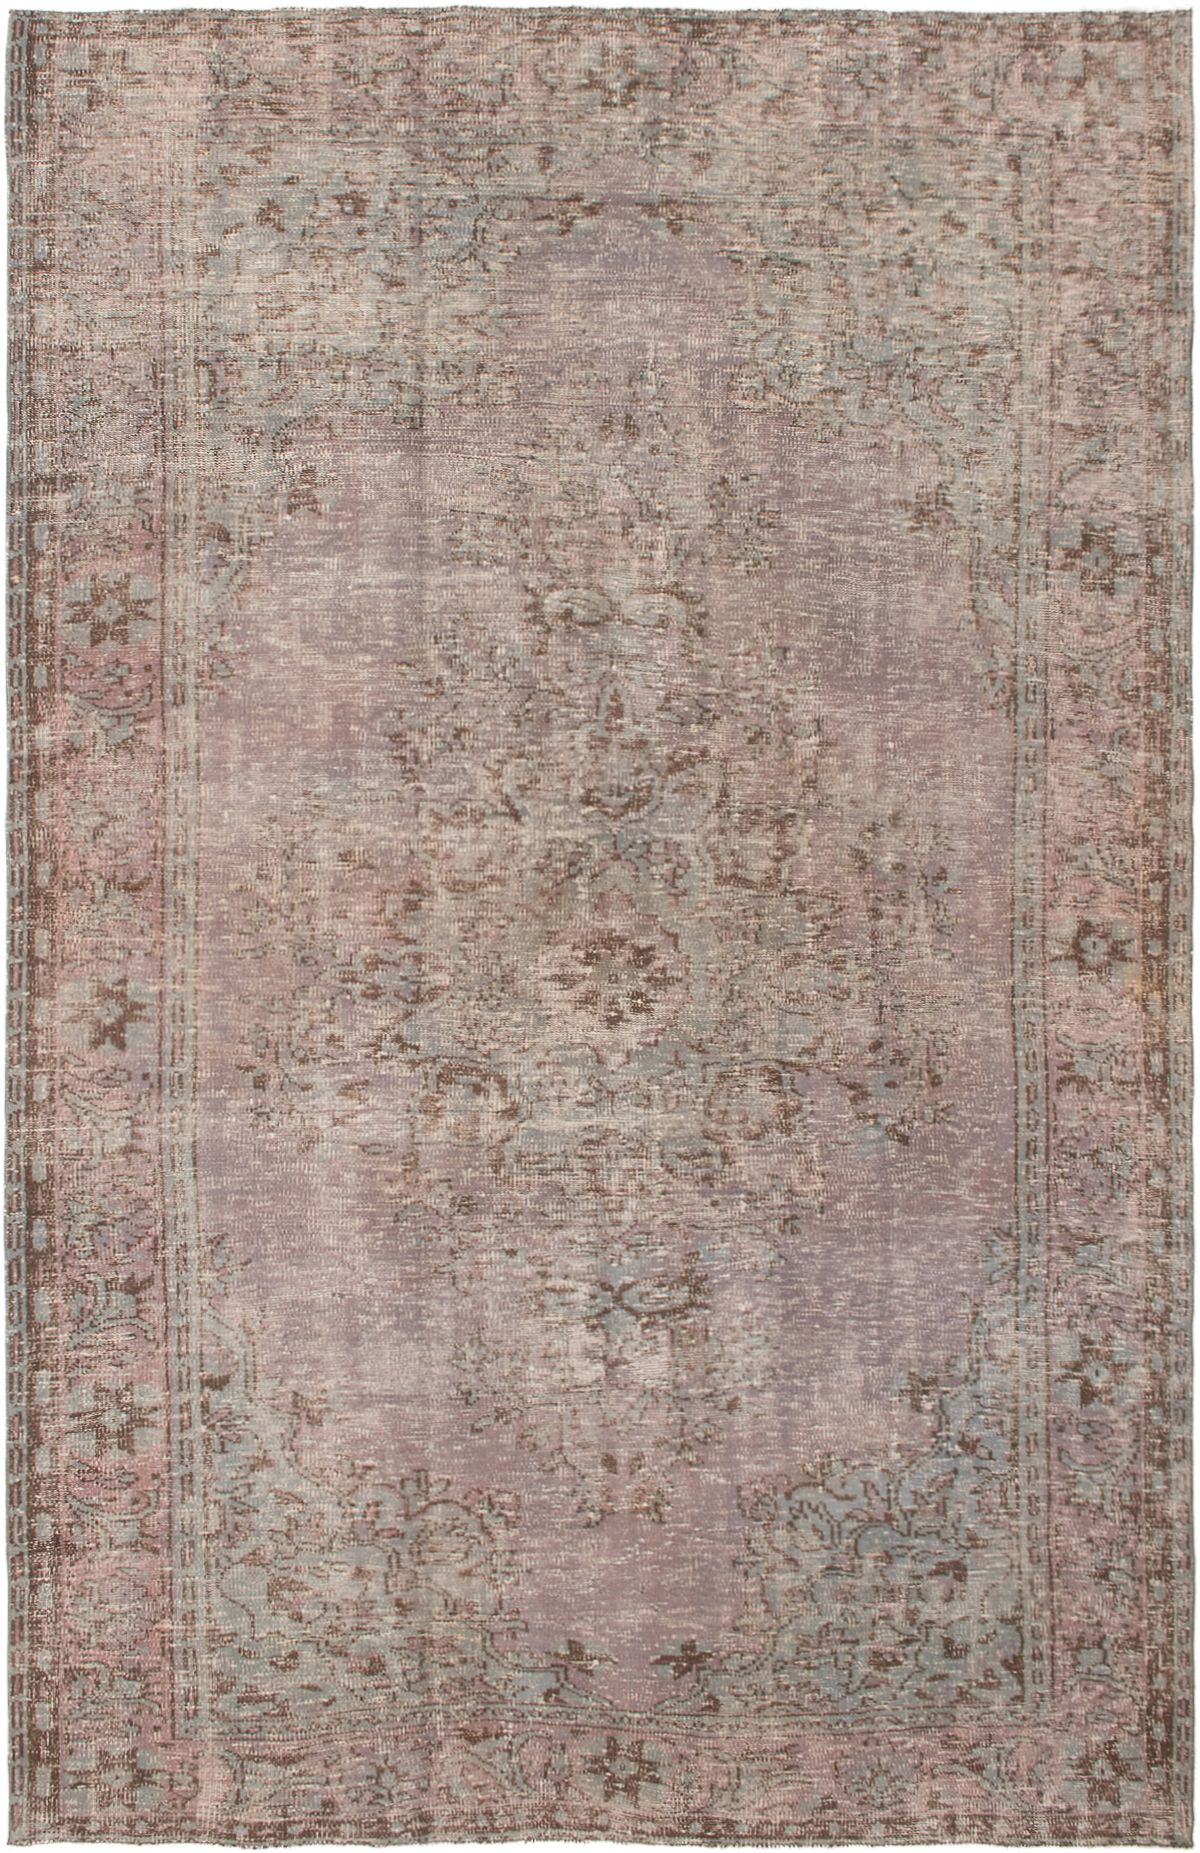 Hand-knotted Color Transition Tan Wool Rug 6'2" x 10'2" Size: 6'2" x 10'2"  